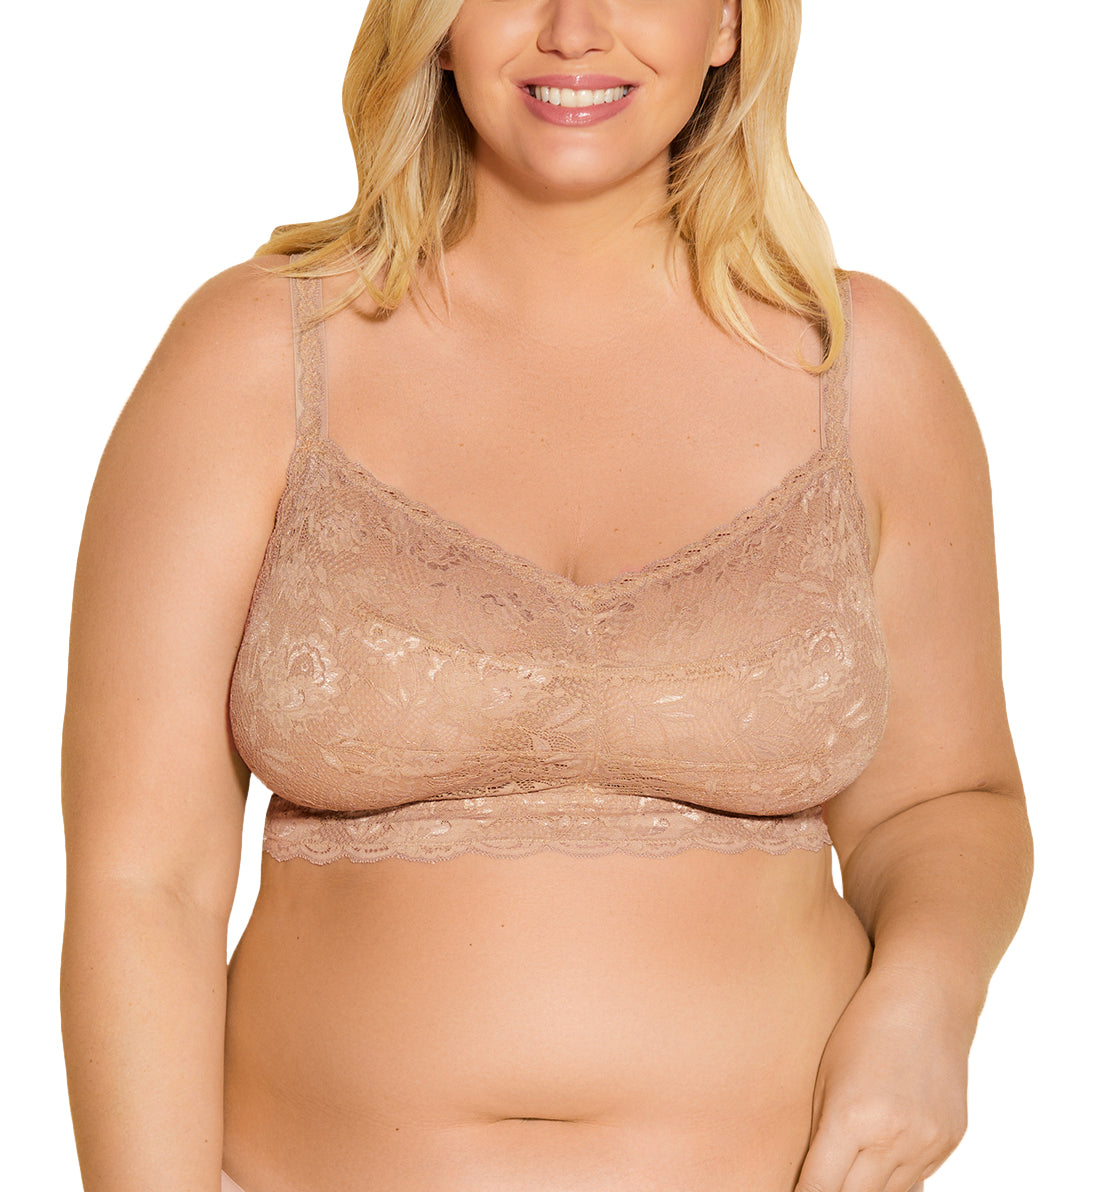 Cosabella NSN ULTRA CURVY Sweetie Bralette (NEVER1321),XS,India - India,XS